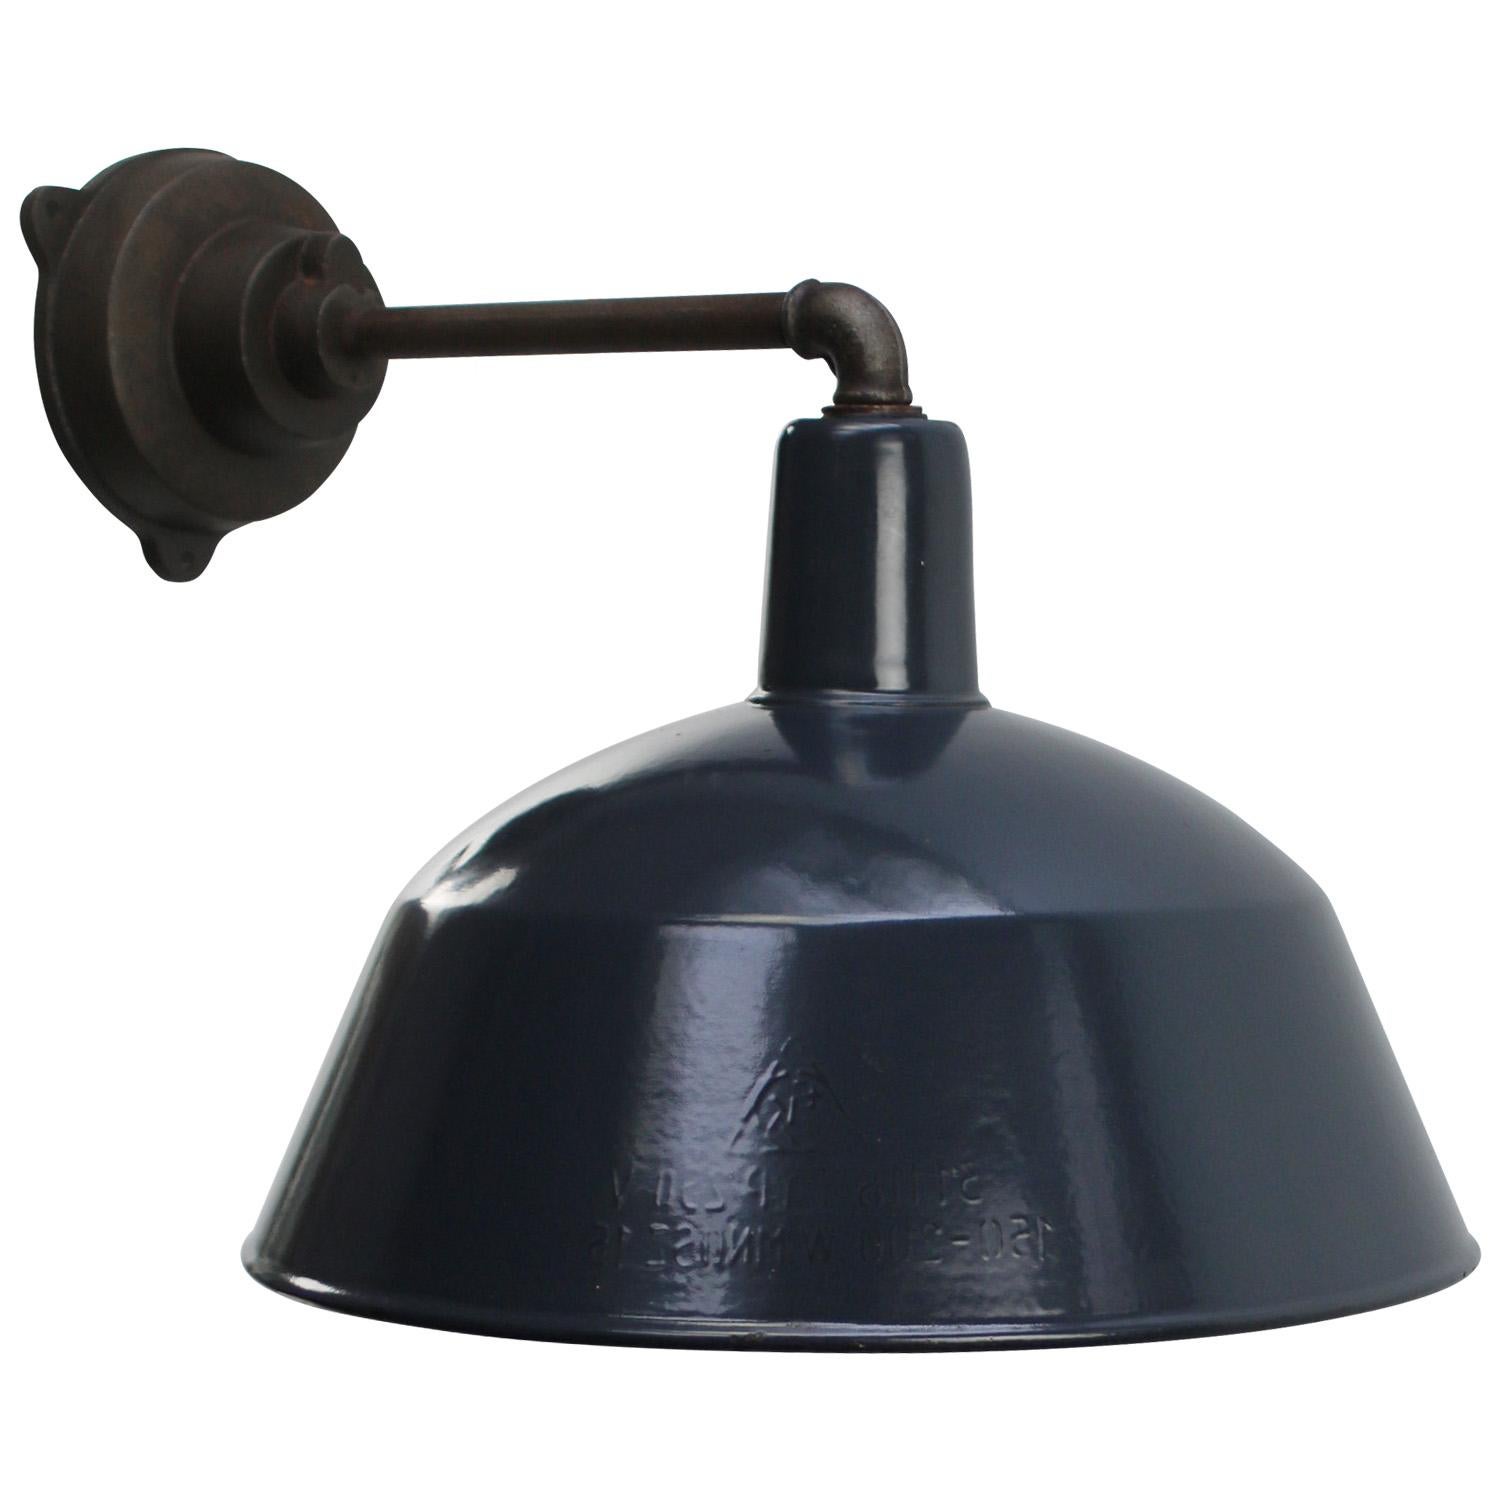 Factory wall light
Blue enamel, white interior

diameter cast iron wall piece: 12 cm, 3 holes to secure

Weight: 3.50 kg / 7.7 lb

Priced per individual item. All lamps have been made suitable by international standards for incandescent light bulbs,